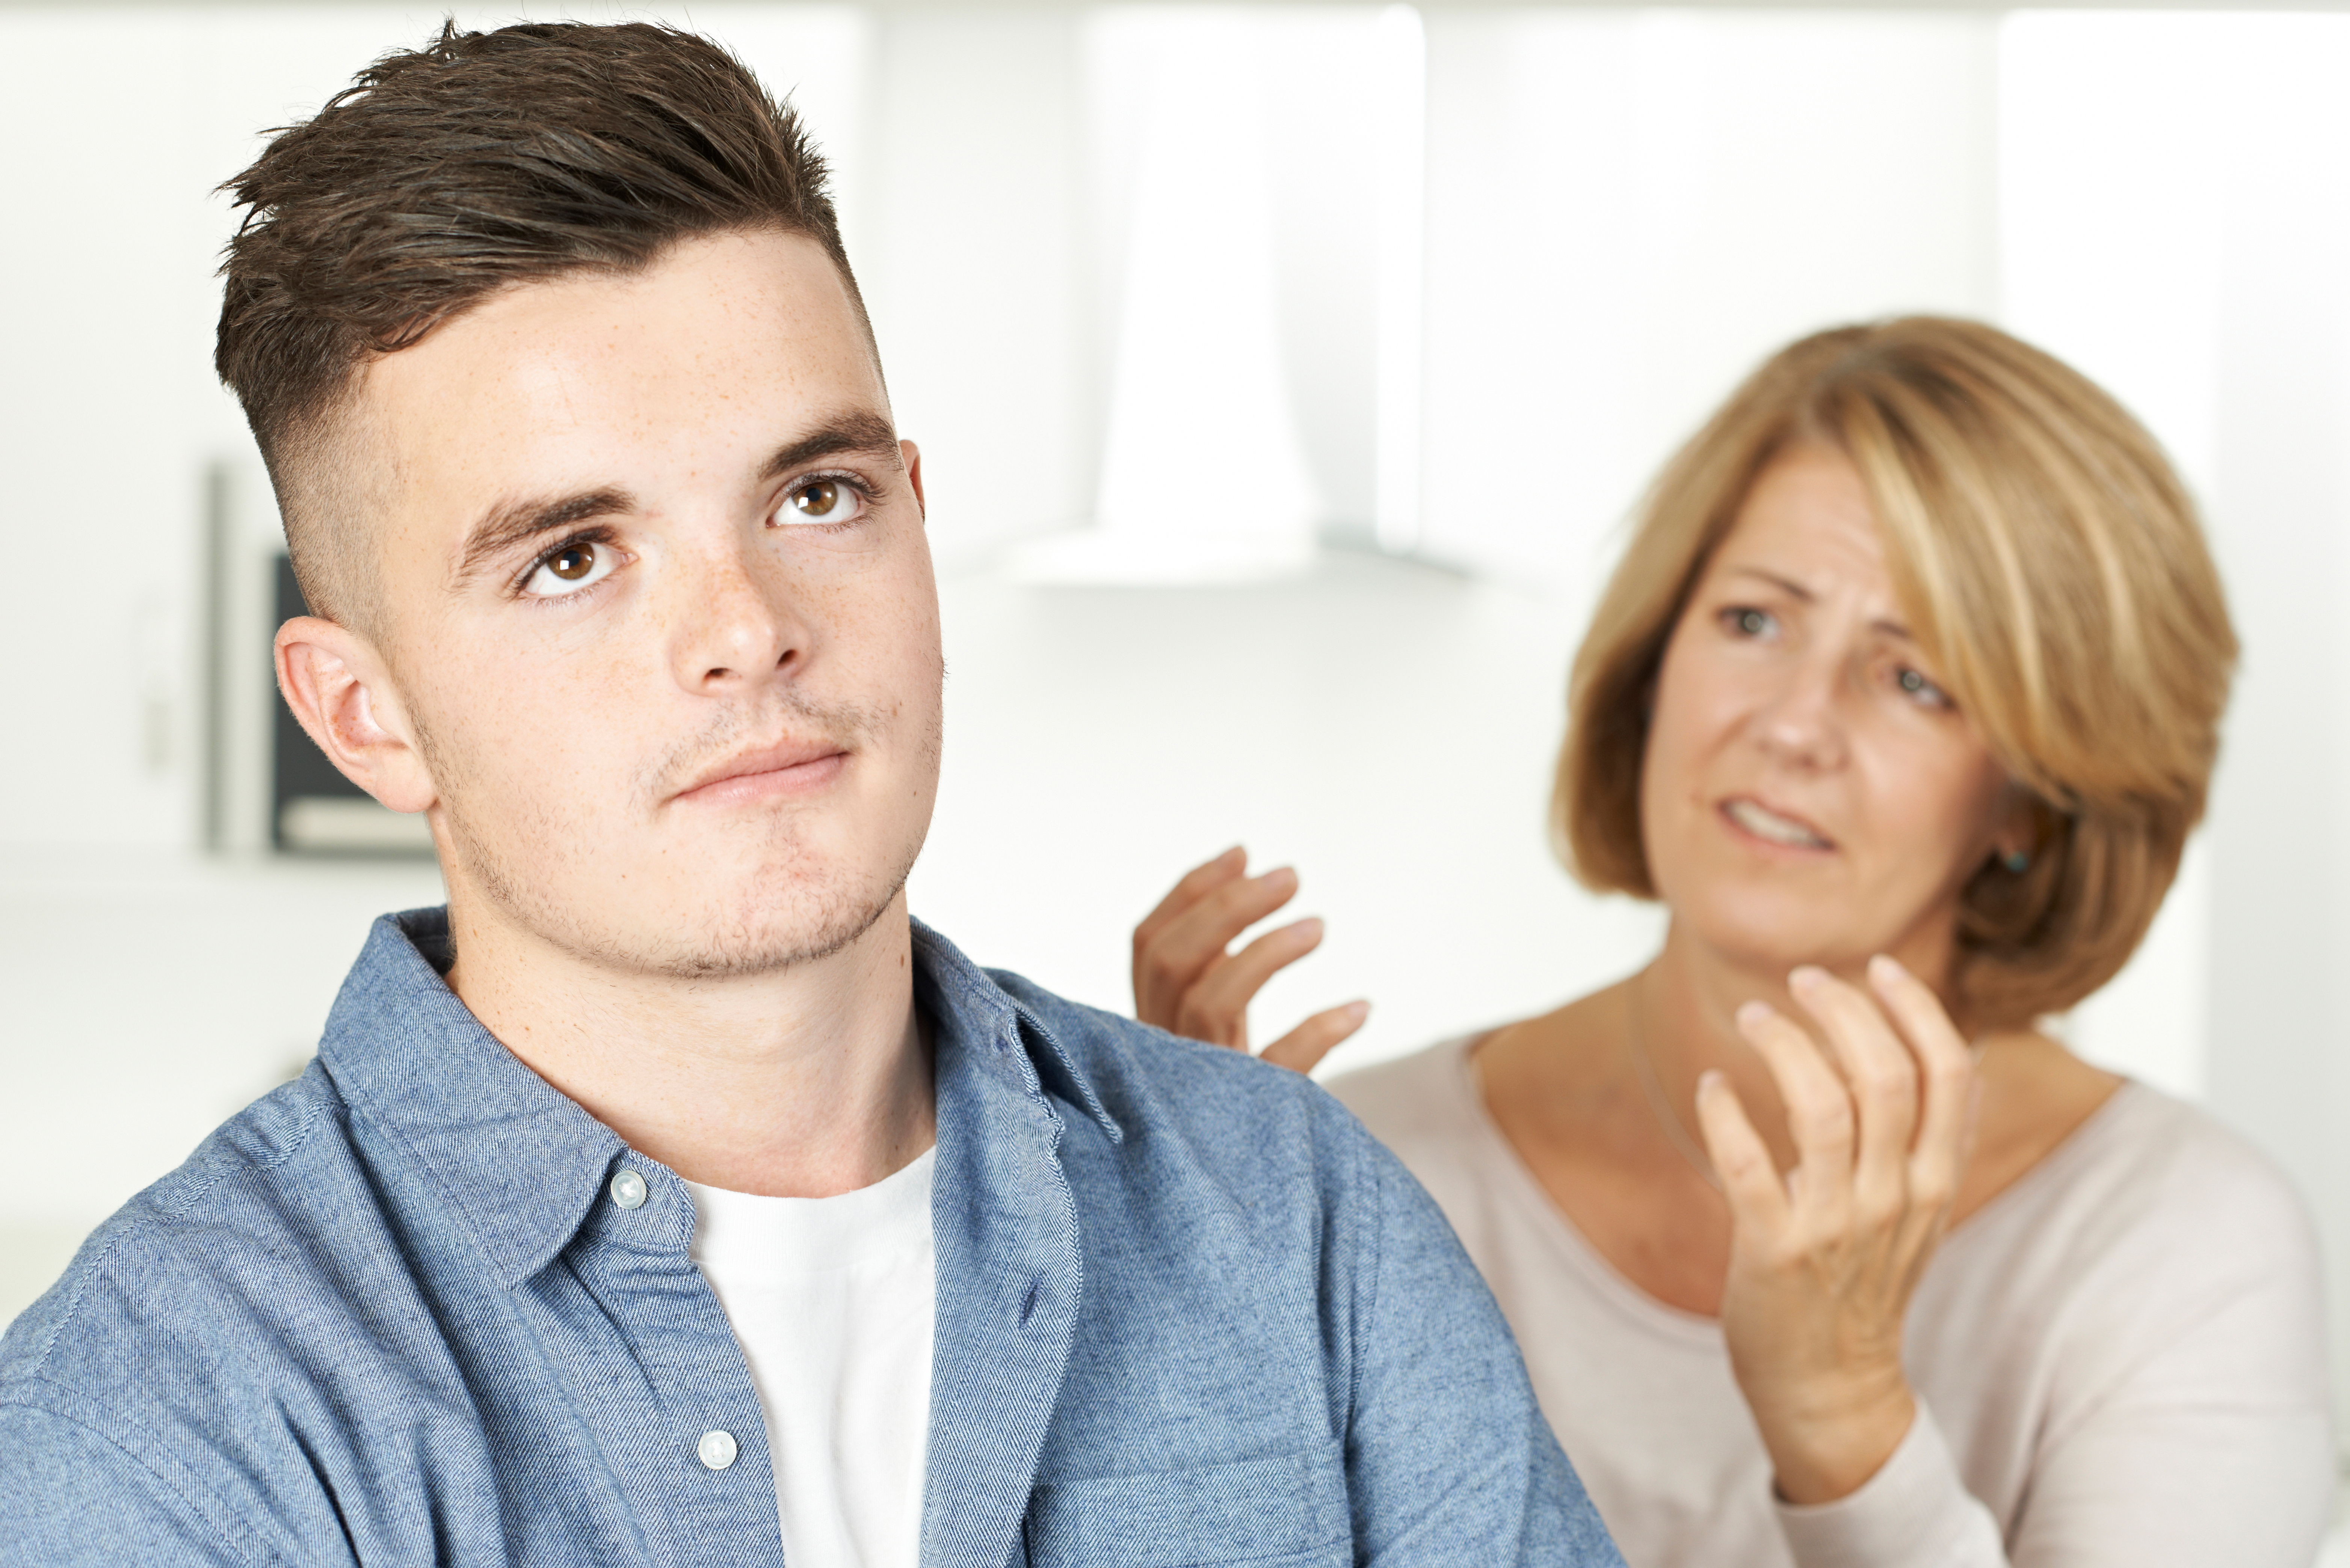 Teenage boy and mother arguing | Source: Shutterstock